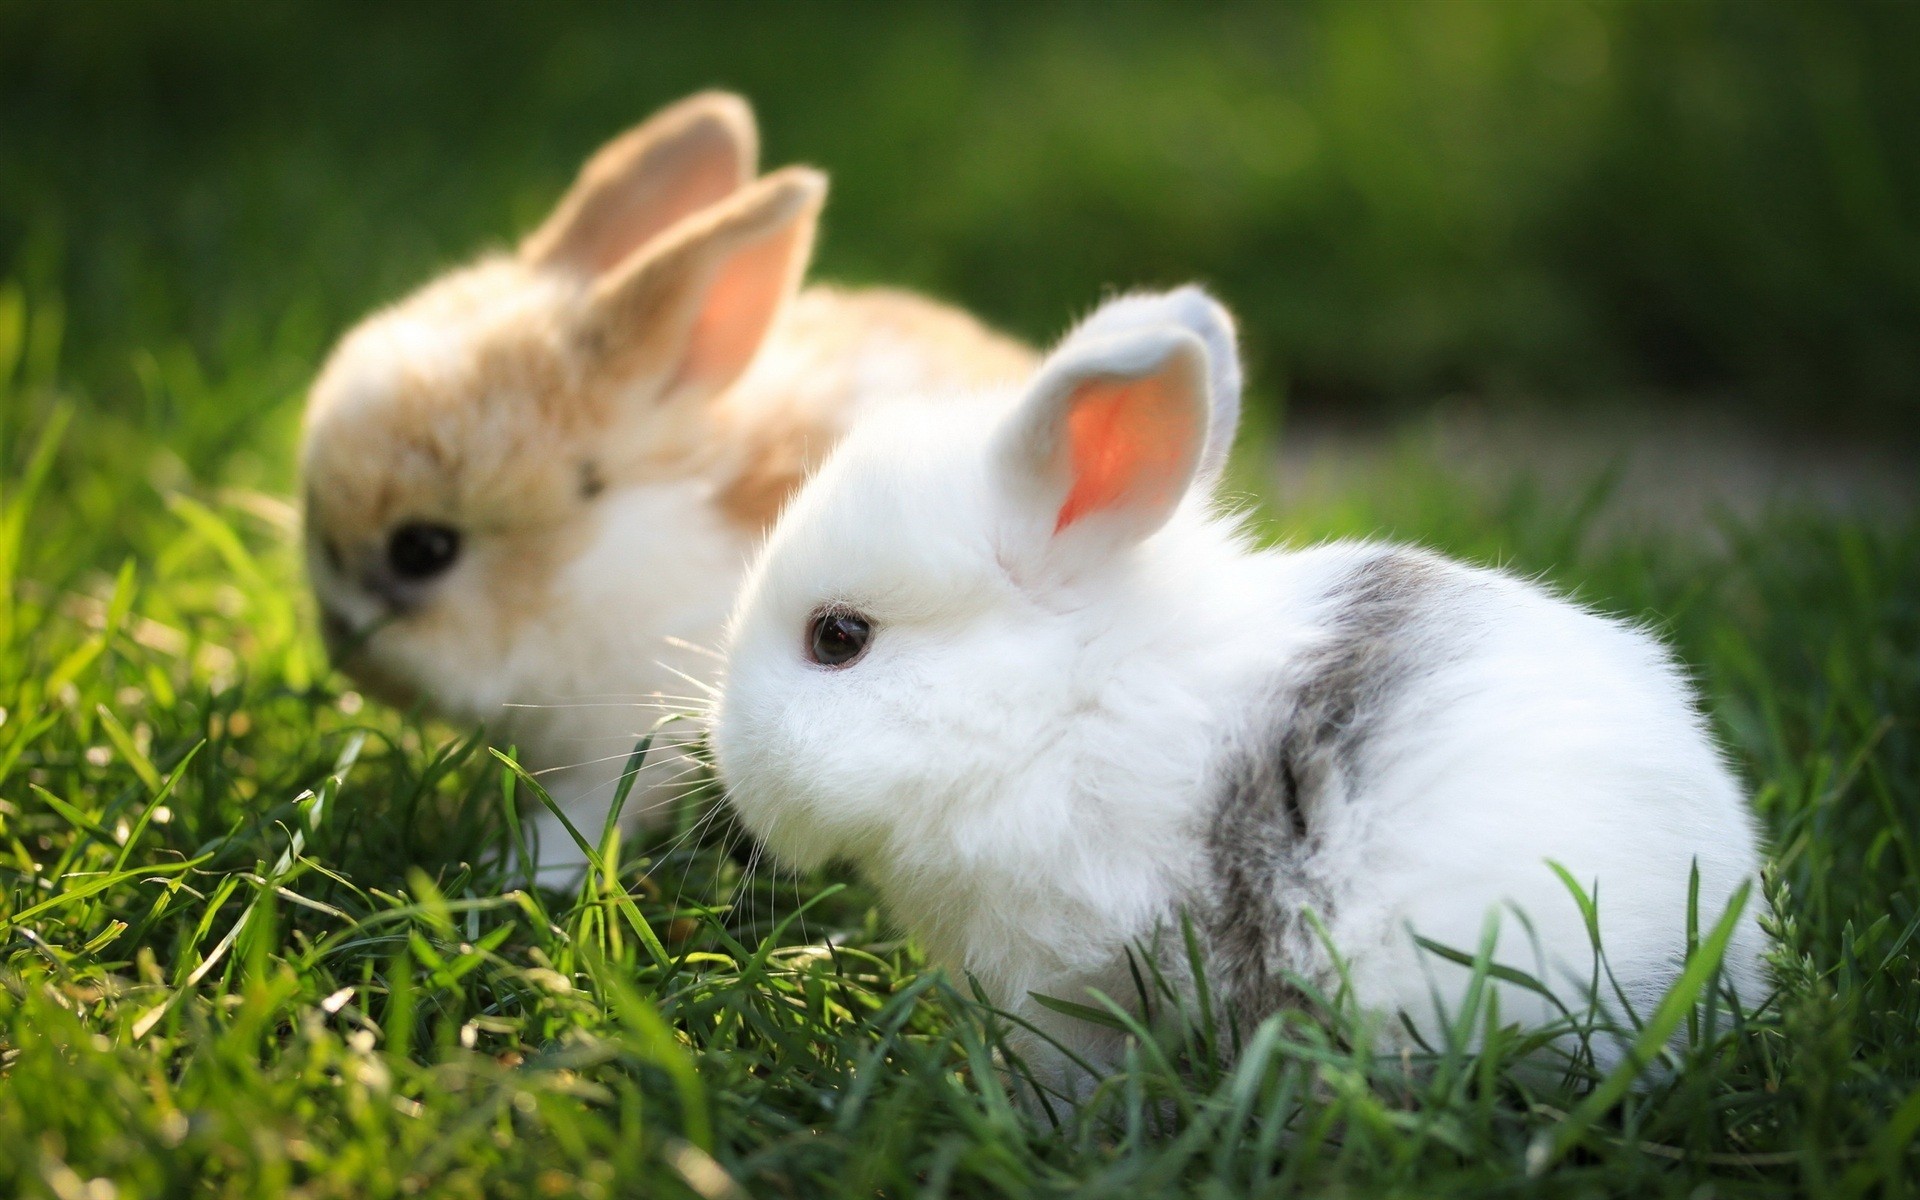 Two little rabbits and a hare sitting on the green grass